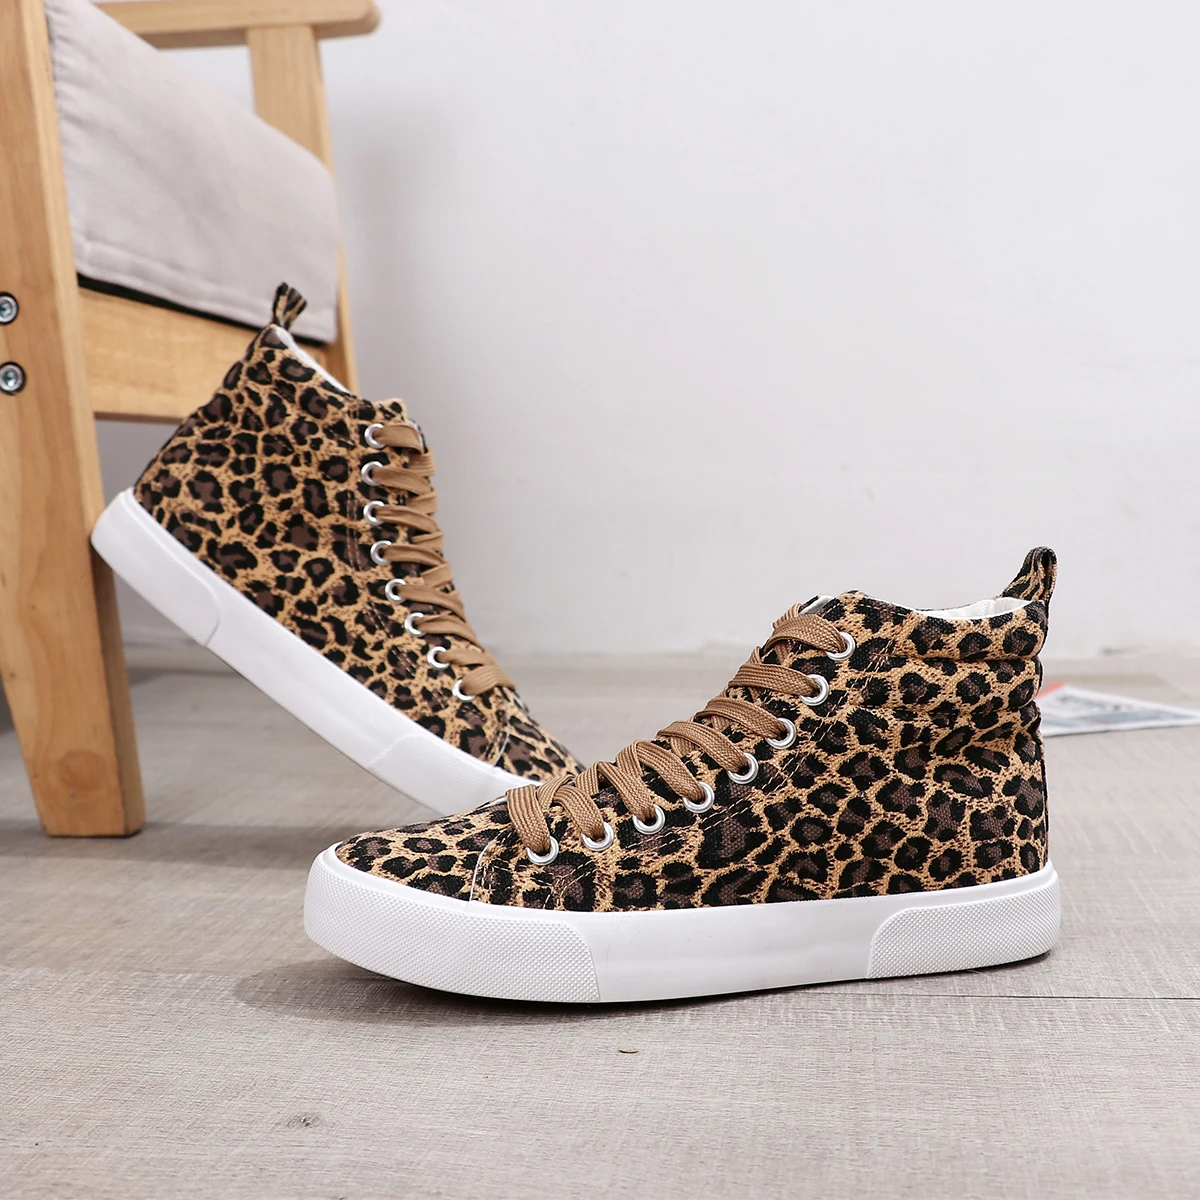 Wenzhou Wholesale Shoes Stock Casual Leopard High Top Womens Canvas Shoes Fashion Lace Up Men's Canvas Trendy Shoes For Women